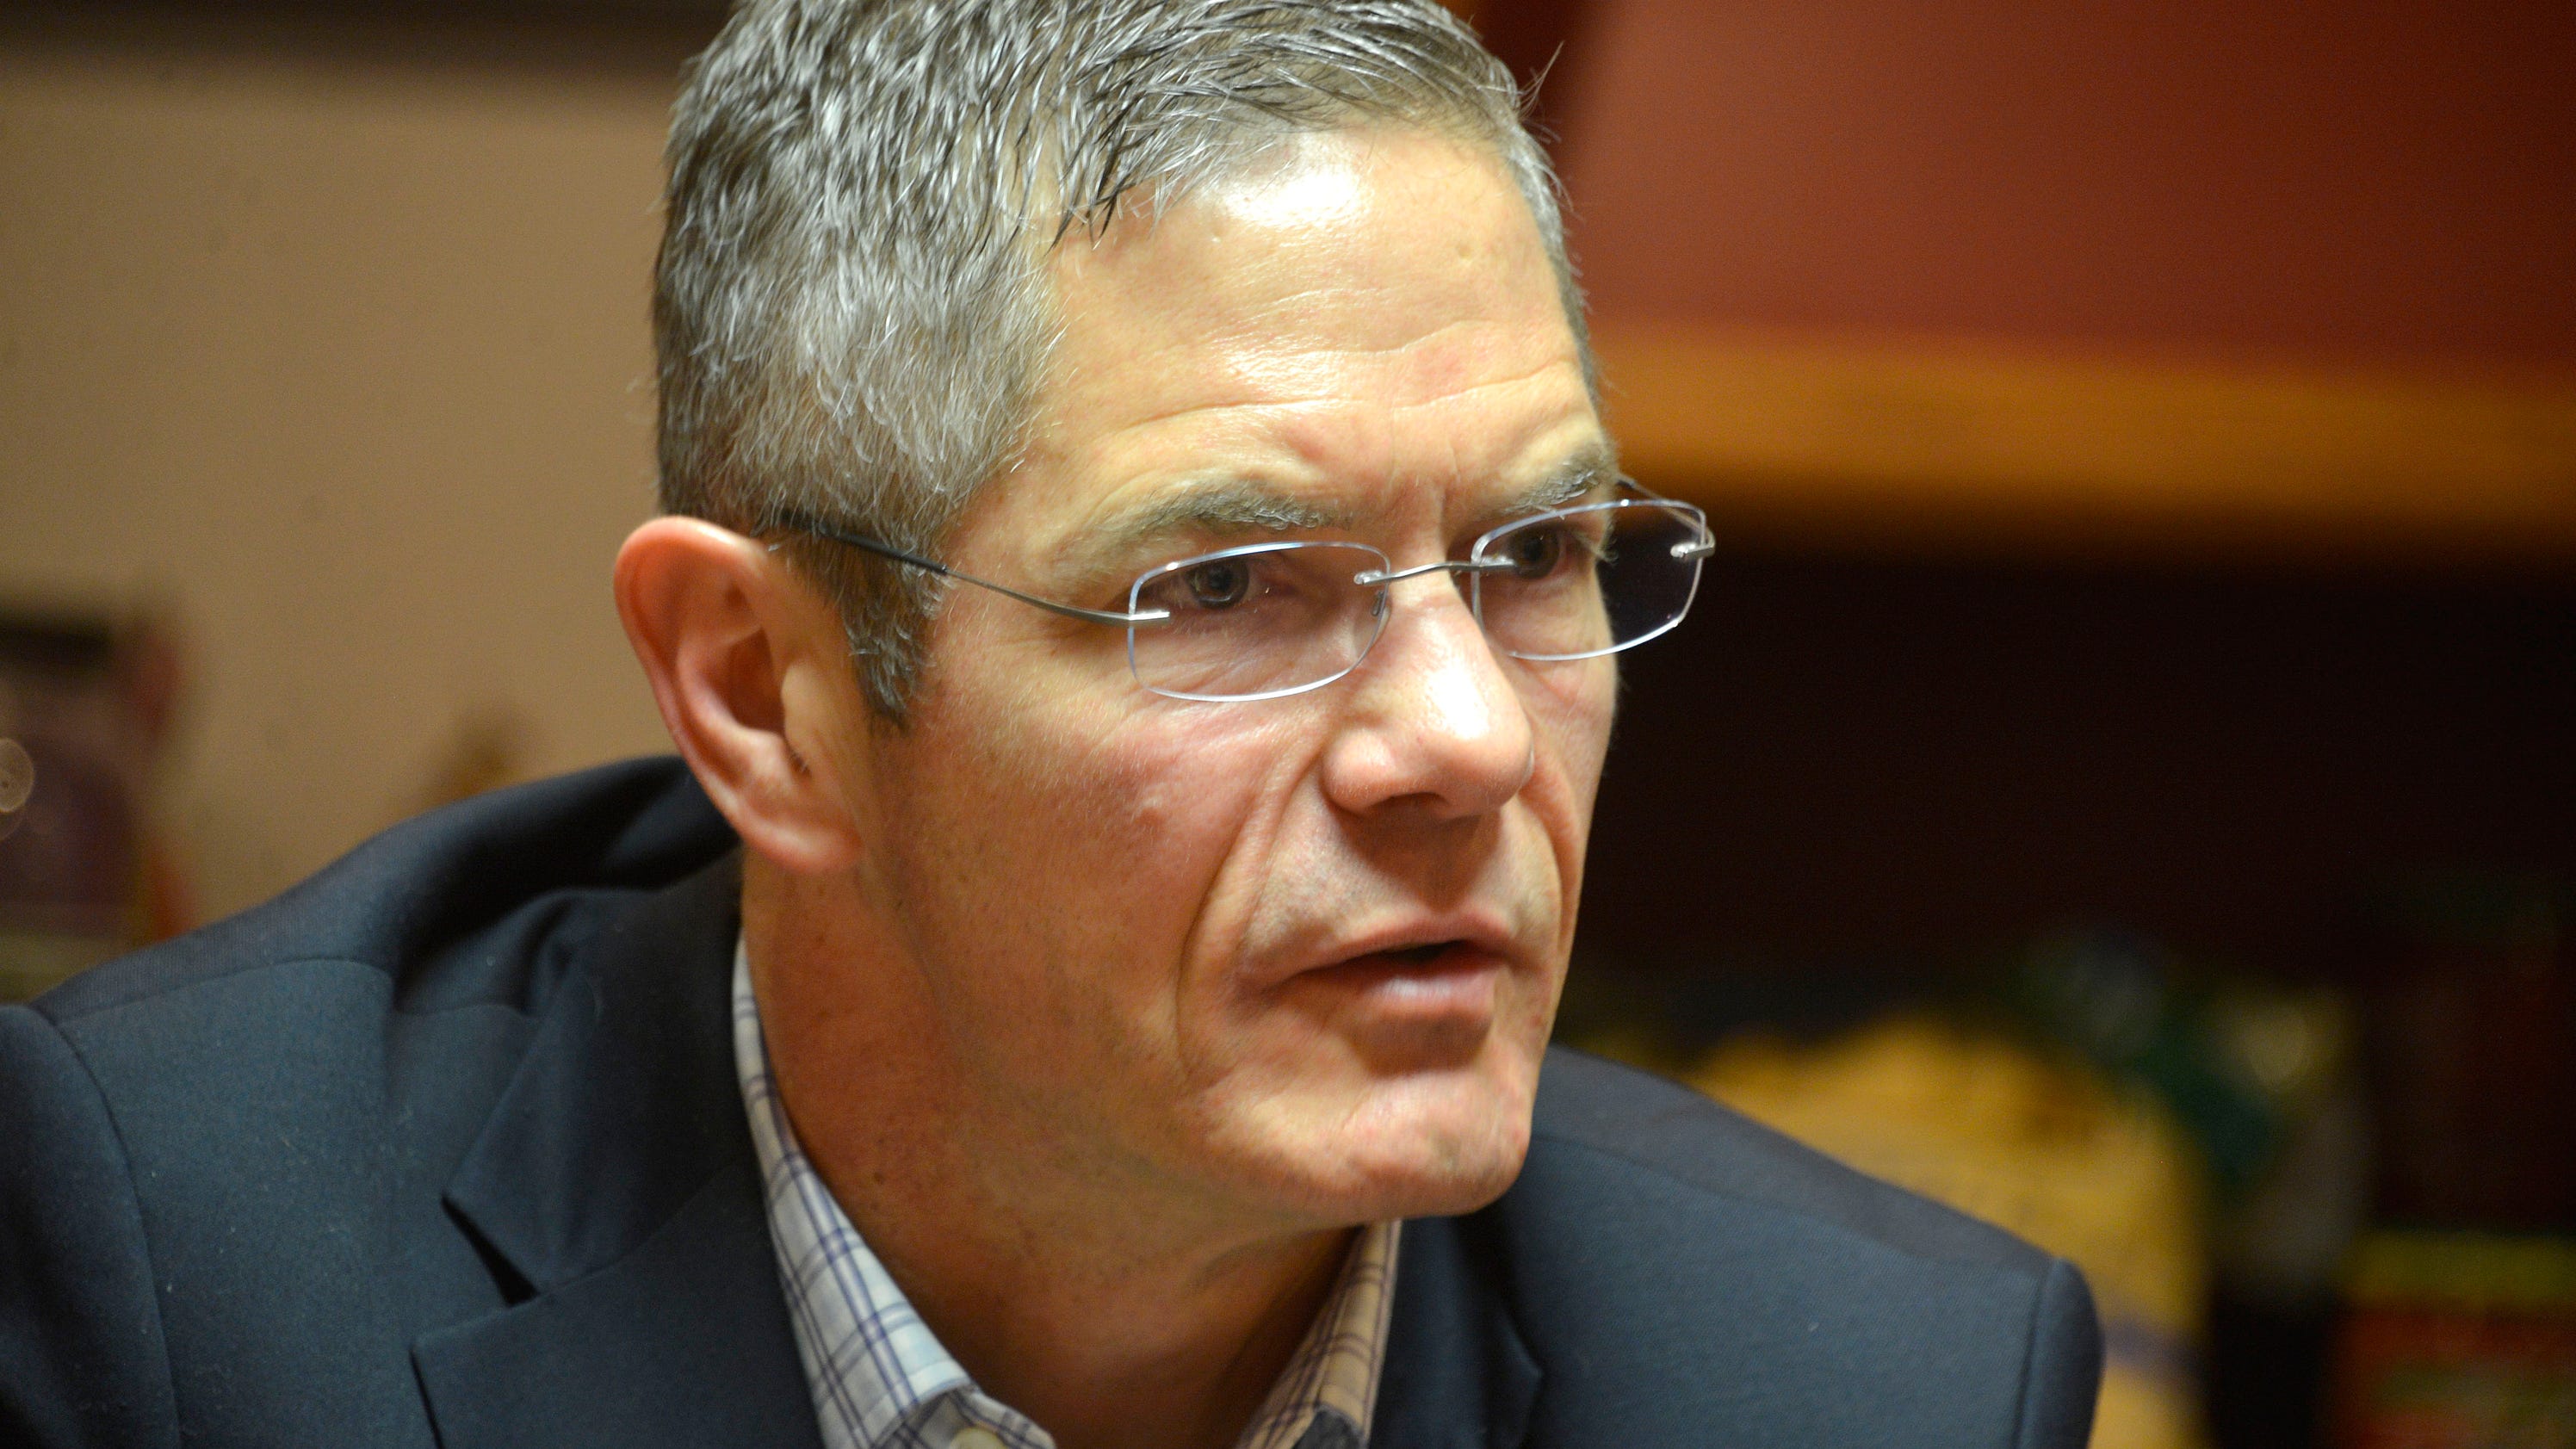 Mark Schauer looks back at failed bid to be Michigan's next governor